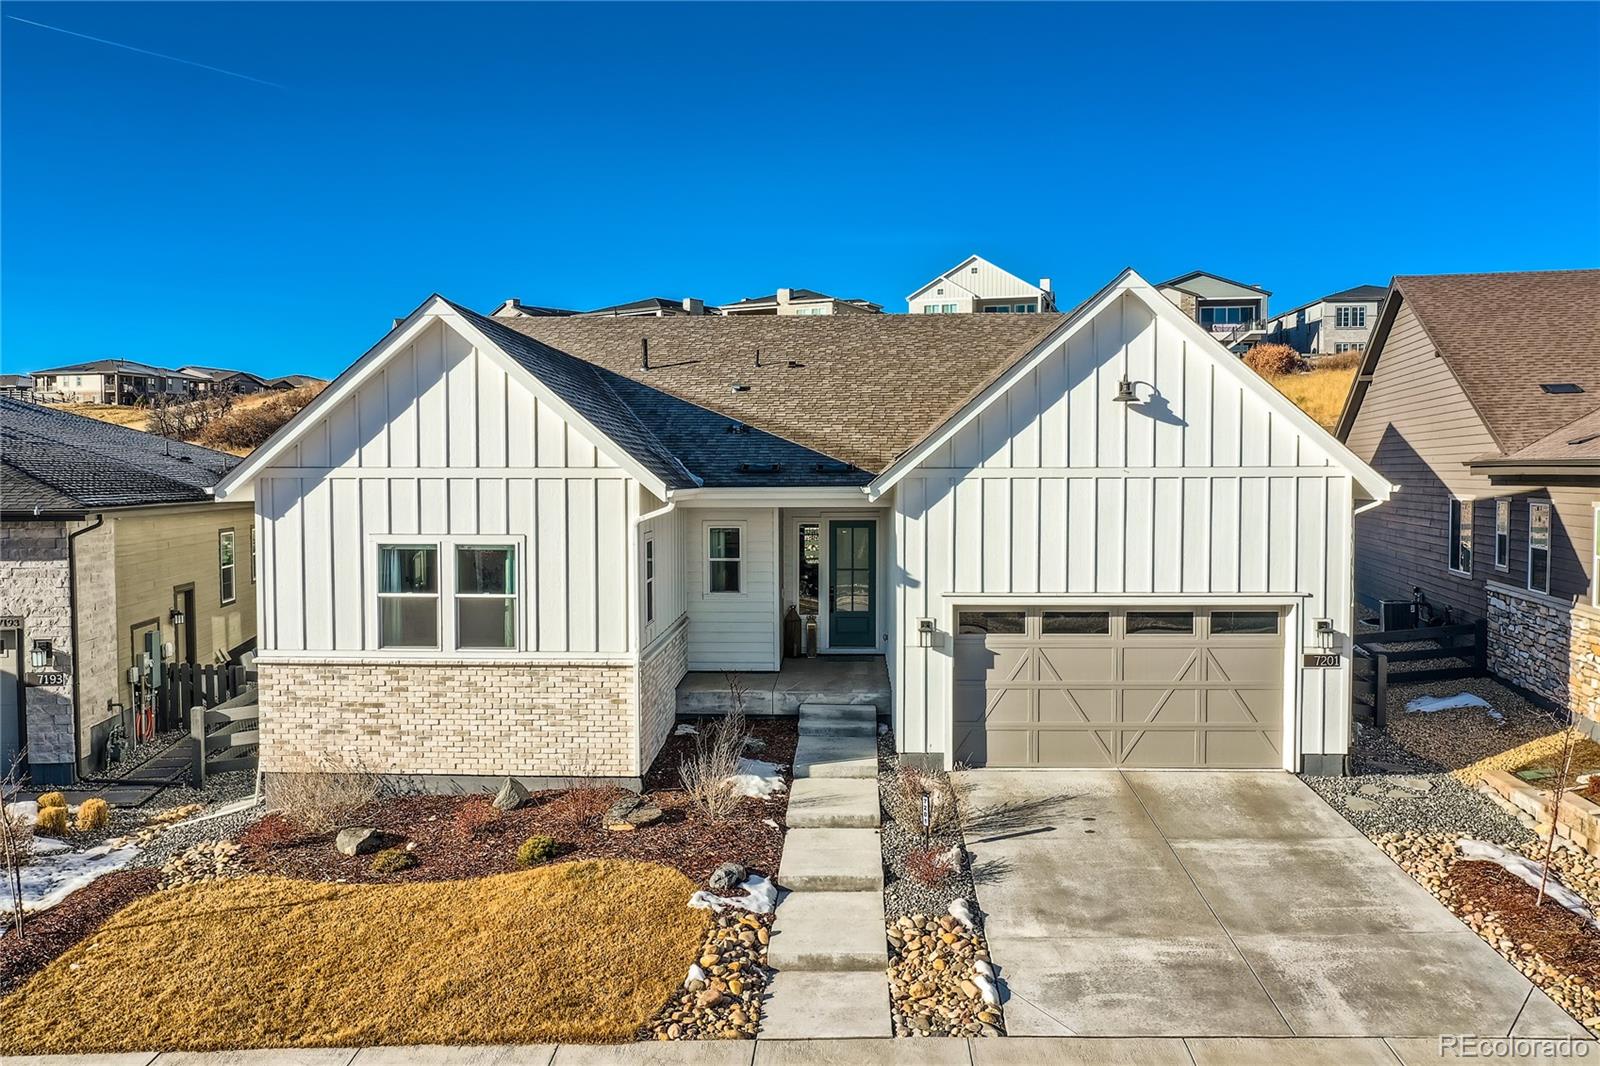 Report Image for 7201  Bellcove Trail,Castle Pines, Colorado